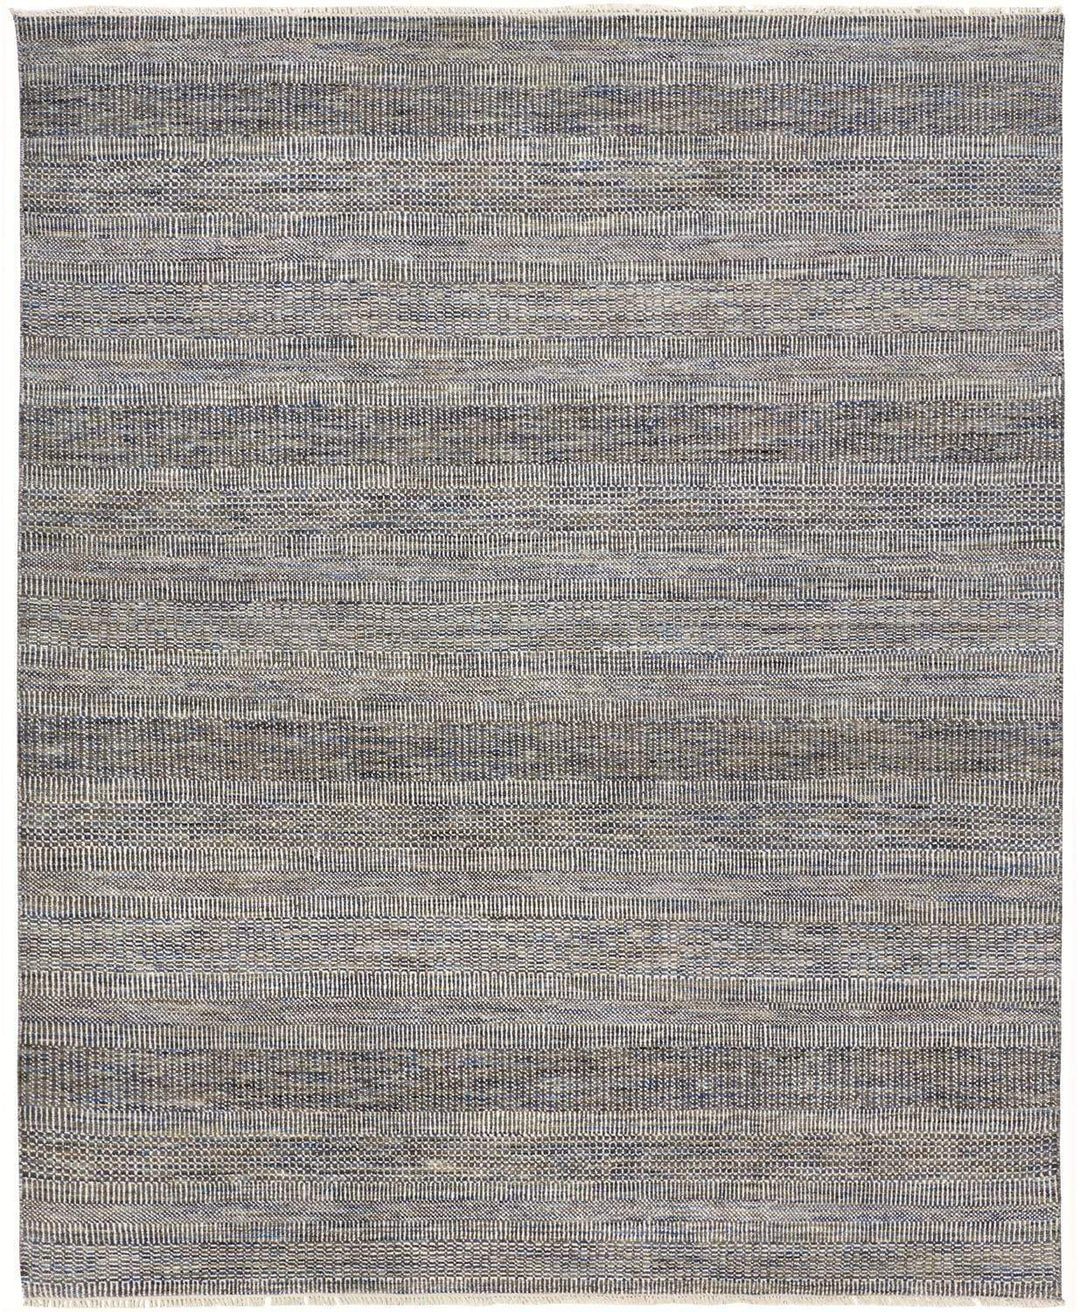 Feizy Feizy Janson Classic Striped Rug - Warm Gray & Bright Blue - Available in 8 Sizes 5'-6" x 8'-6" I92I6064BLU000E50